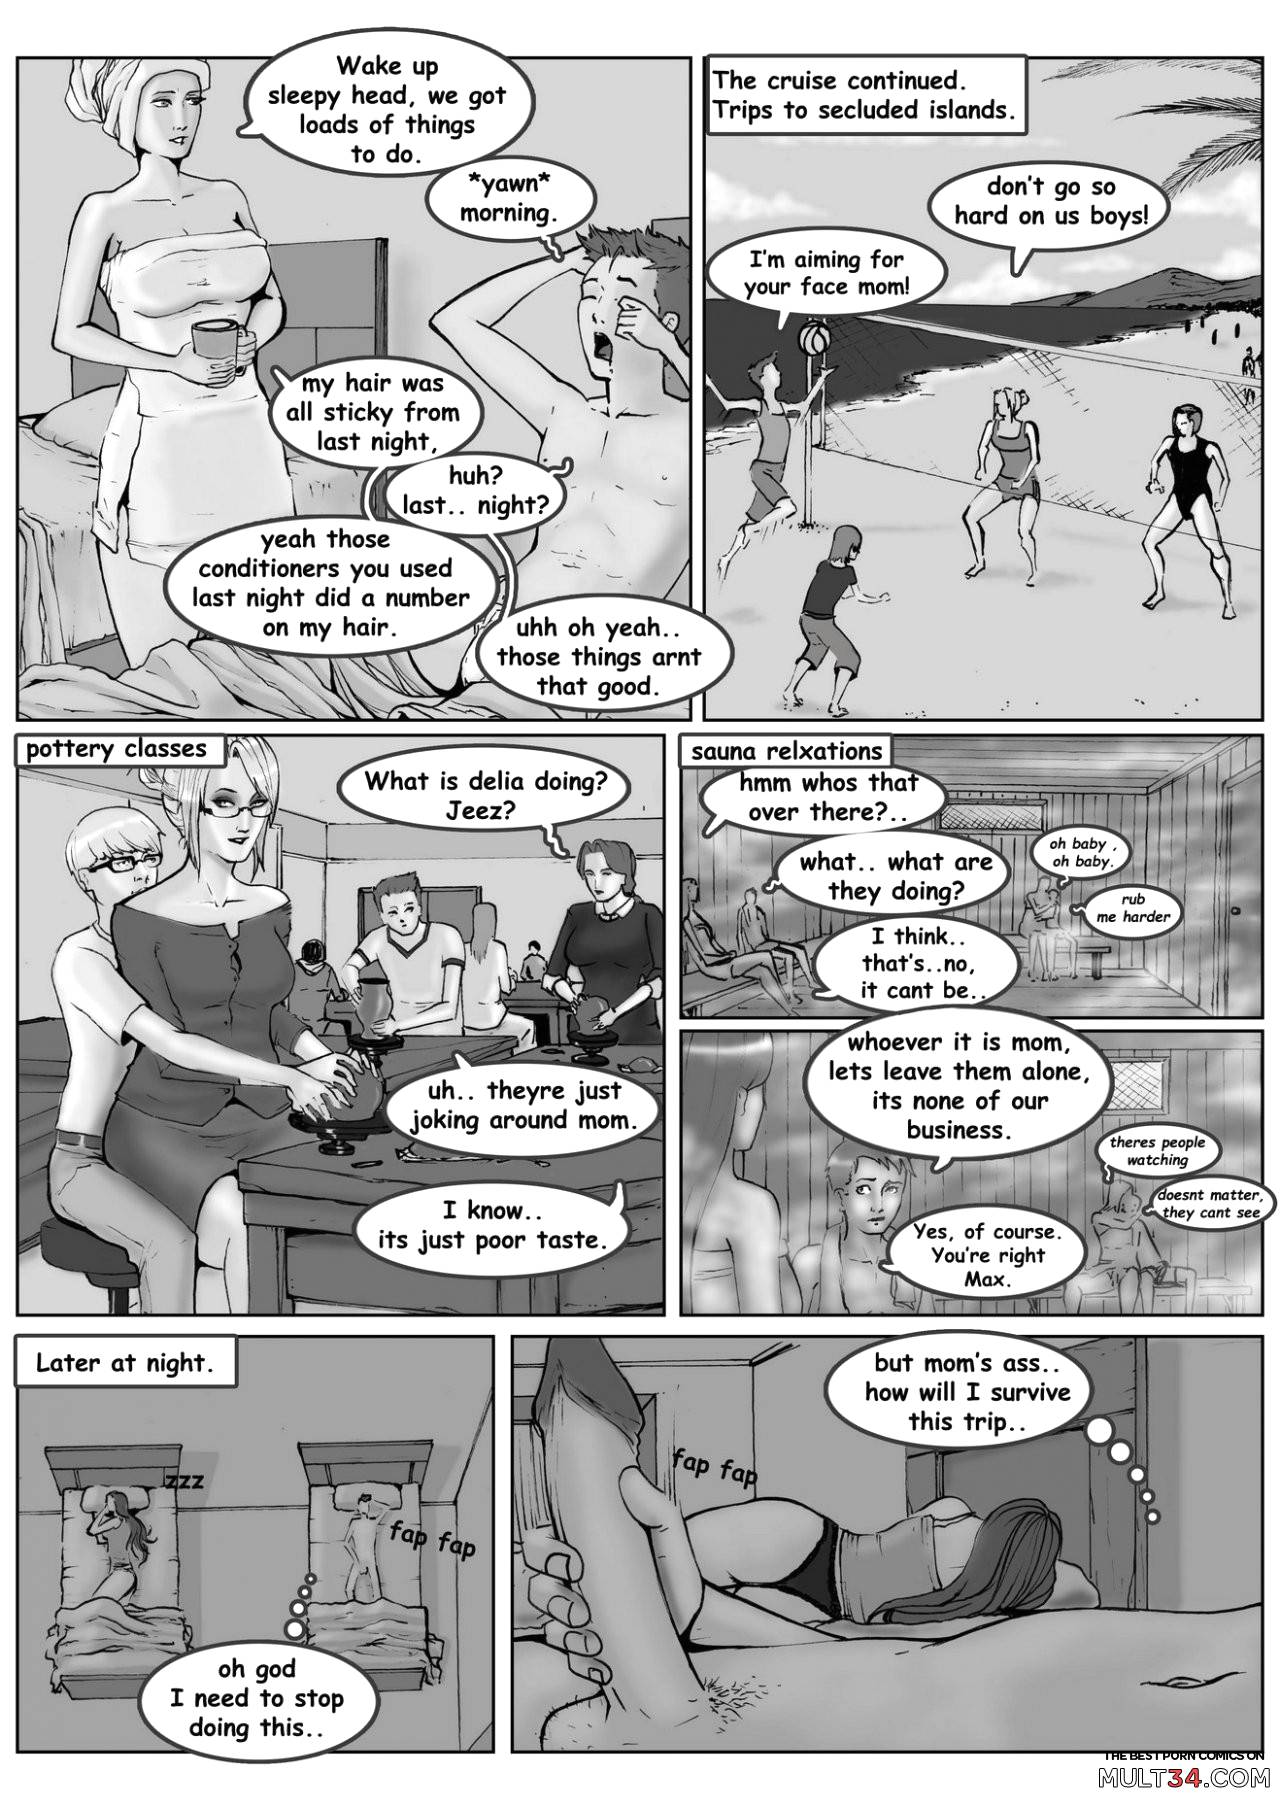 Max and Maddie's Island Quest: Part 1: Jocasta page 13